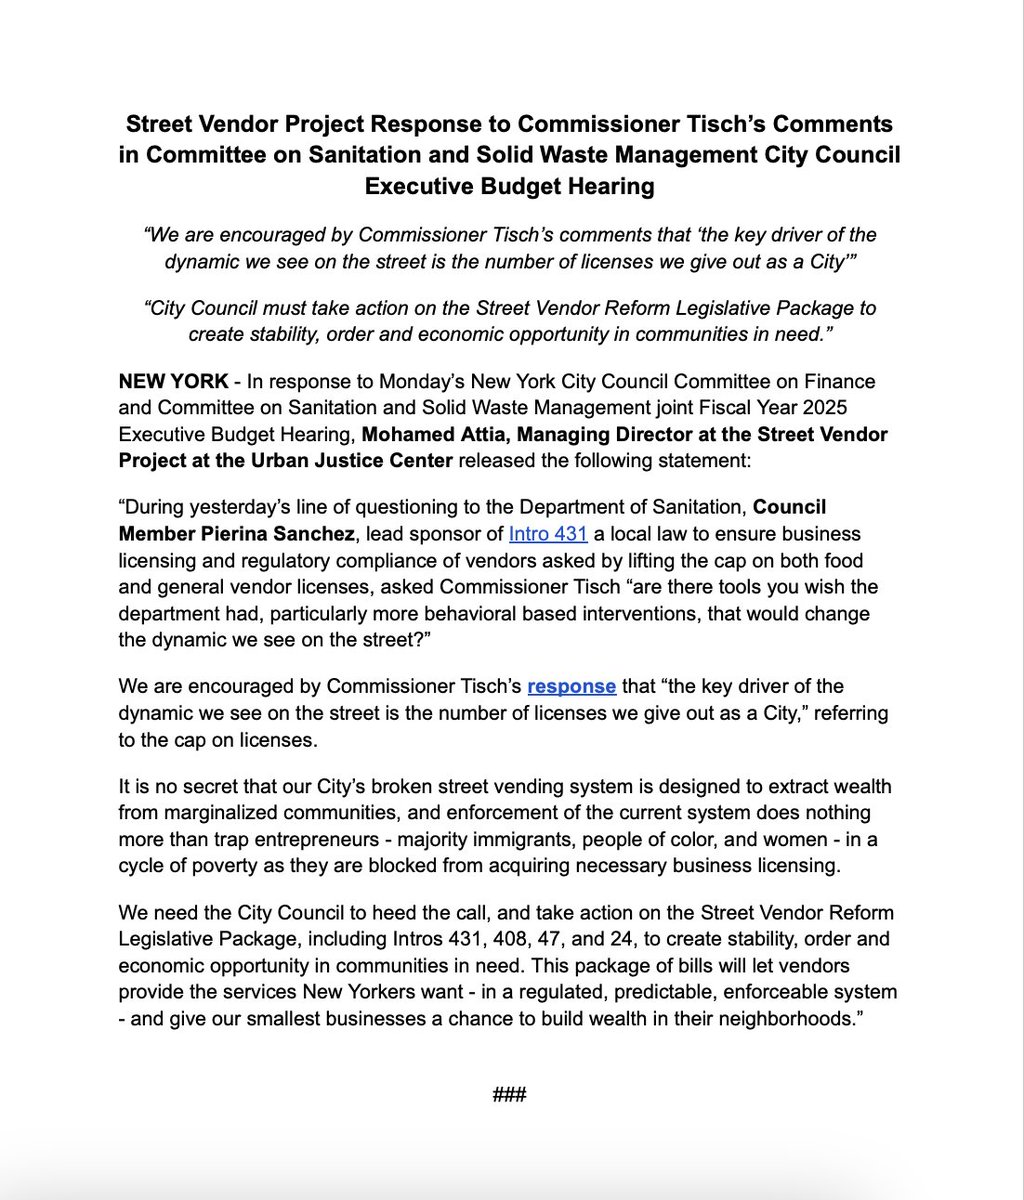 Response from @Mo__Attia: 'We need @NYCCouncil to pass #StreetVendorReform to create stability, order & economic opportunity in communities in need. This package of bills will let vendors provide the services New Yorkers want - in a regulated and enforceable system.'